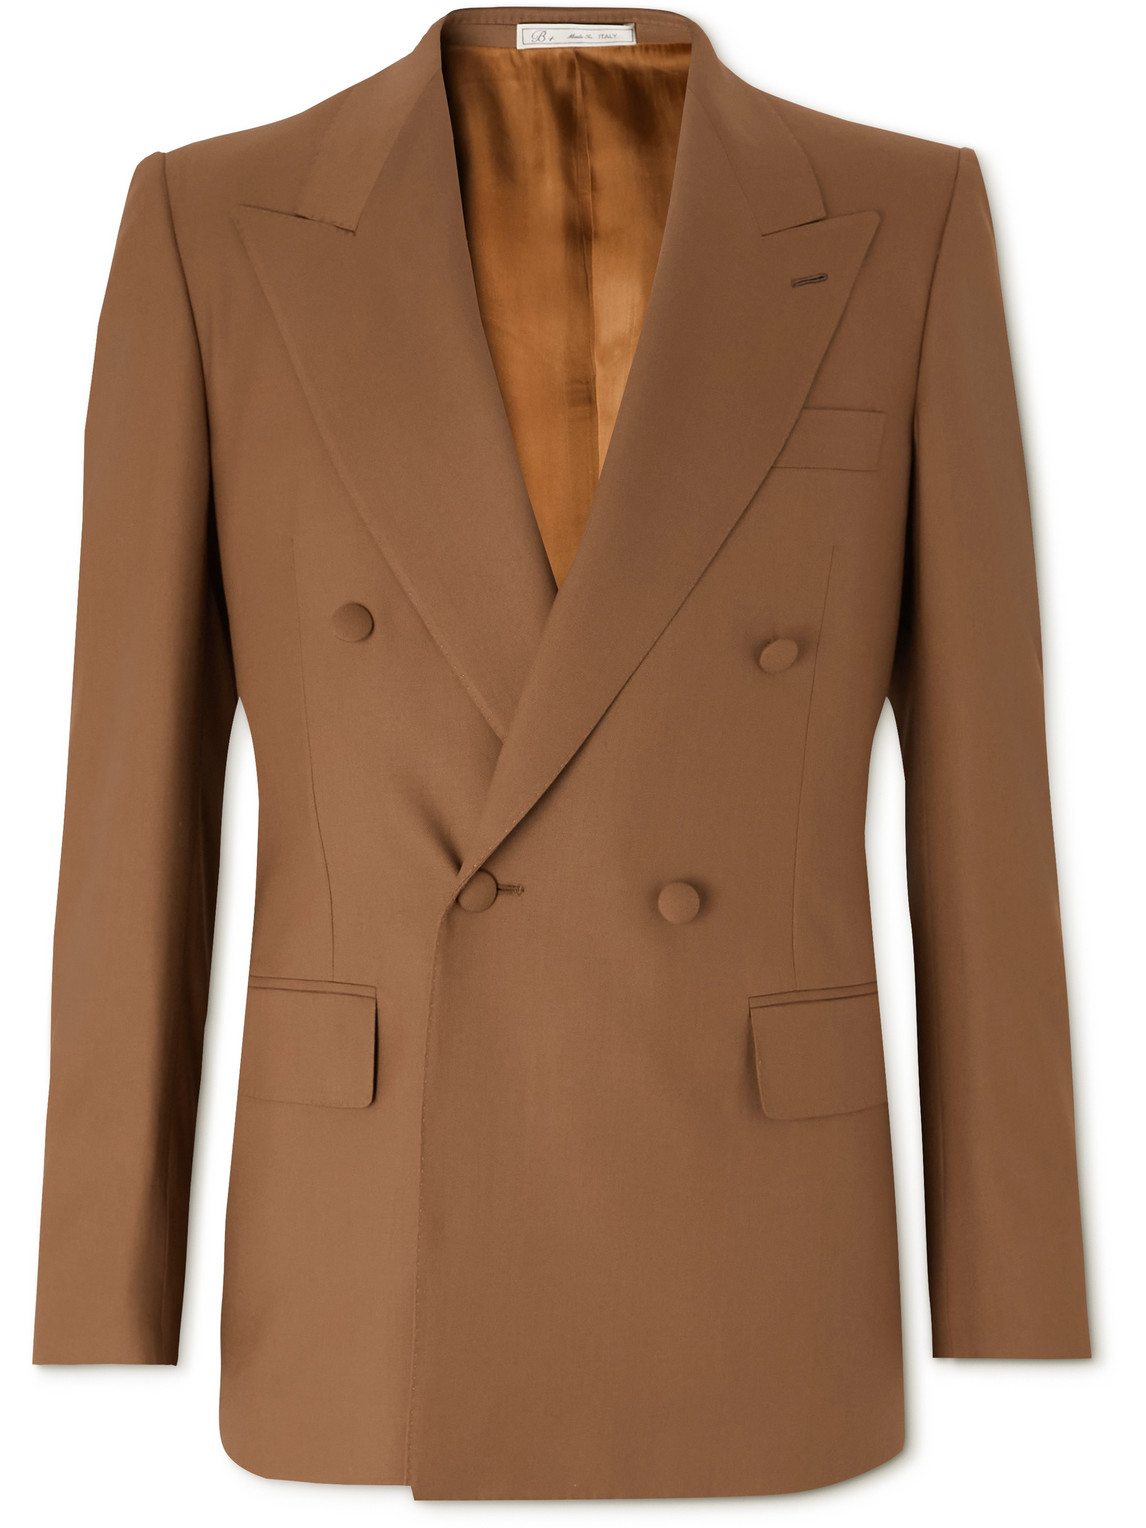 Jacques Marie Mage Double-Breasted Wool-Twill Suit Jacket